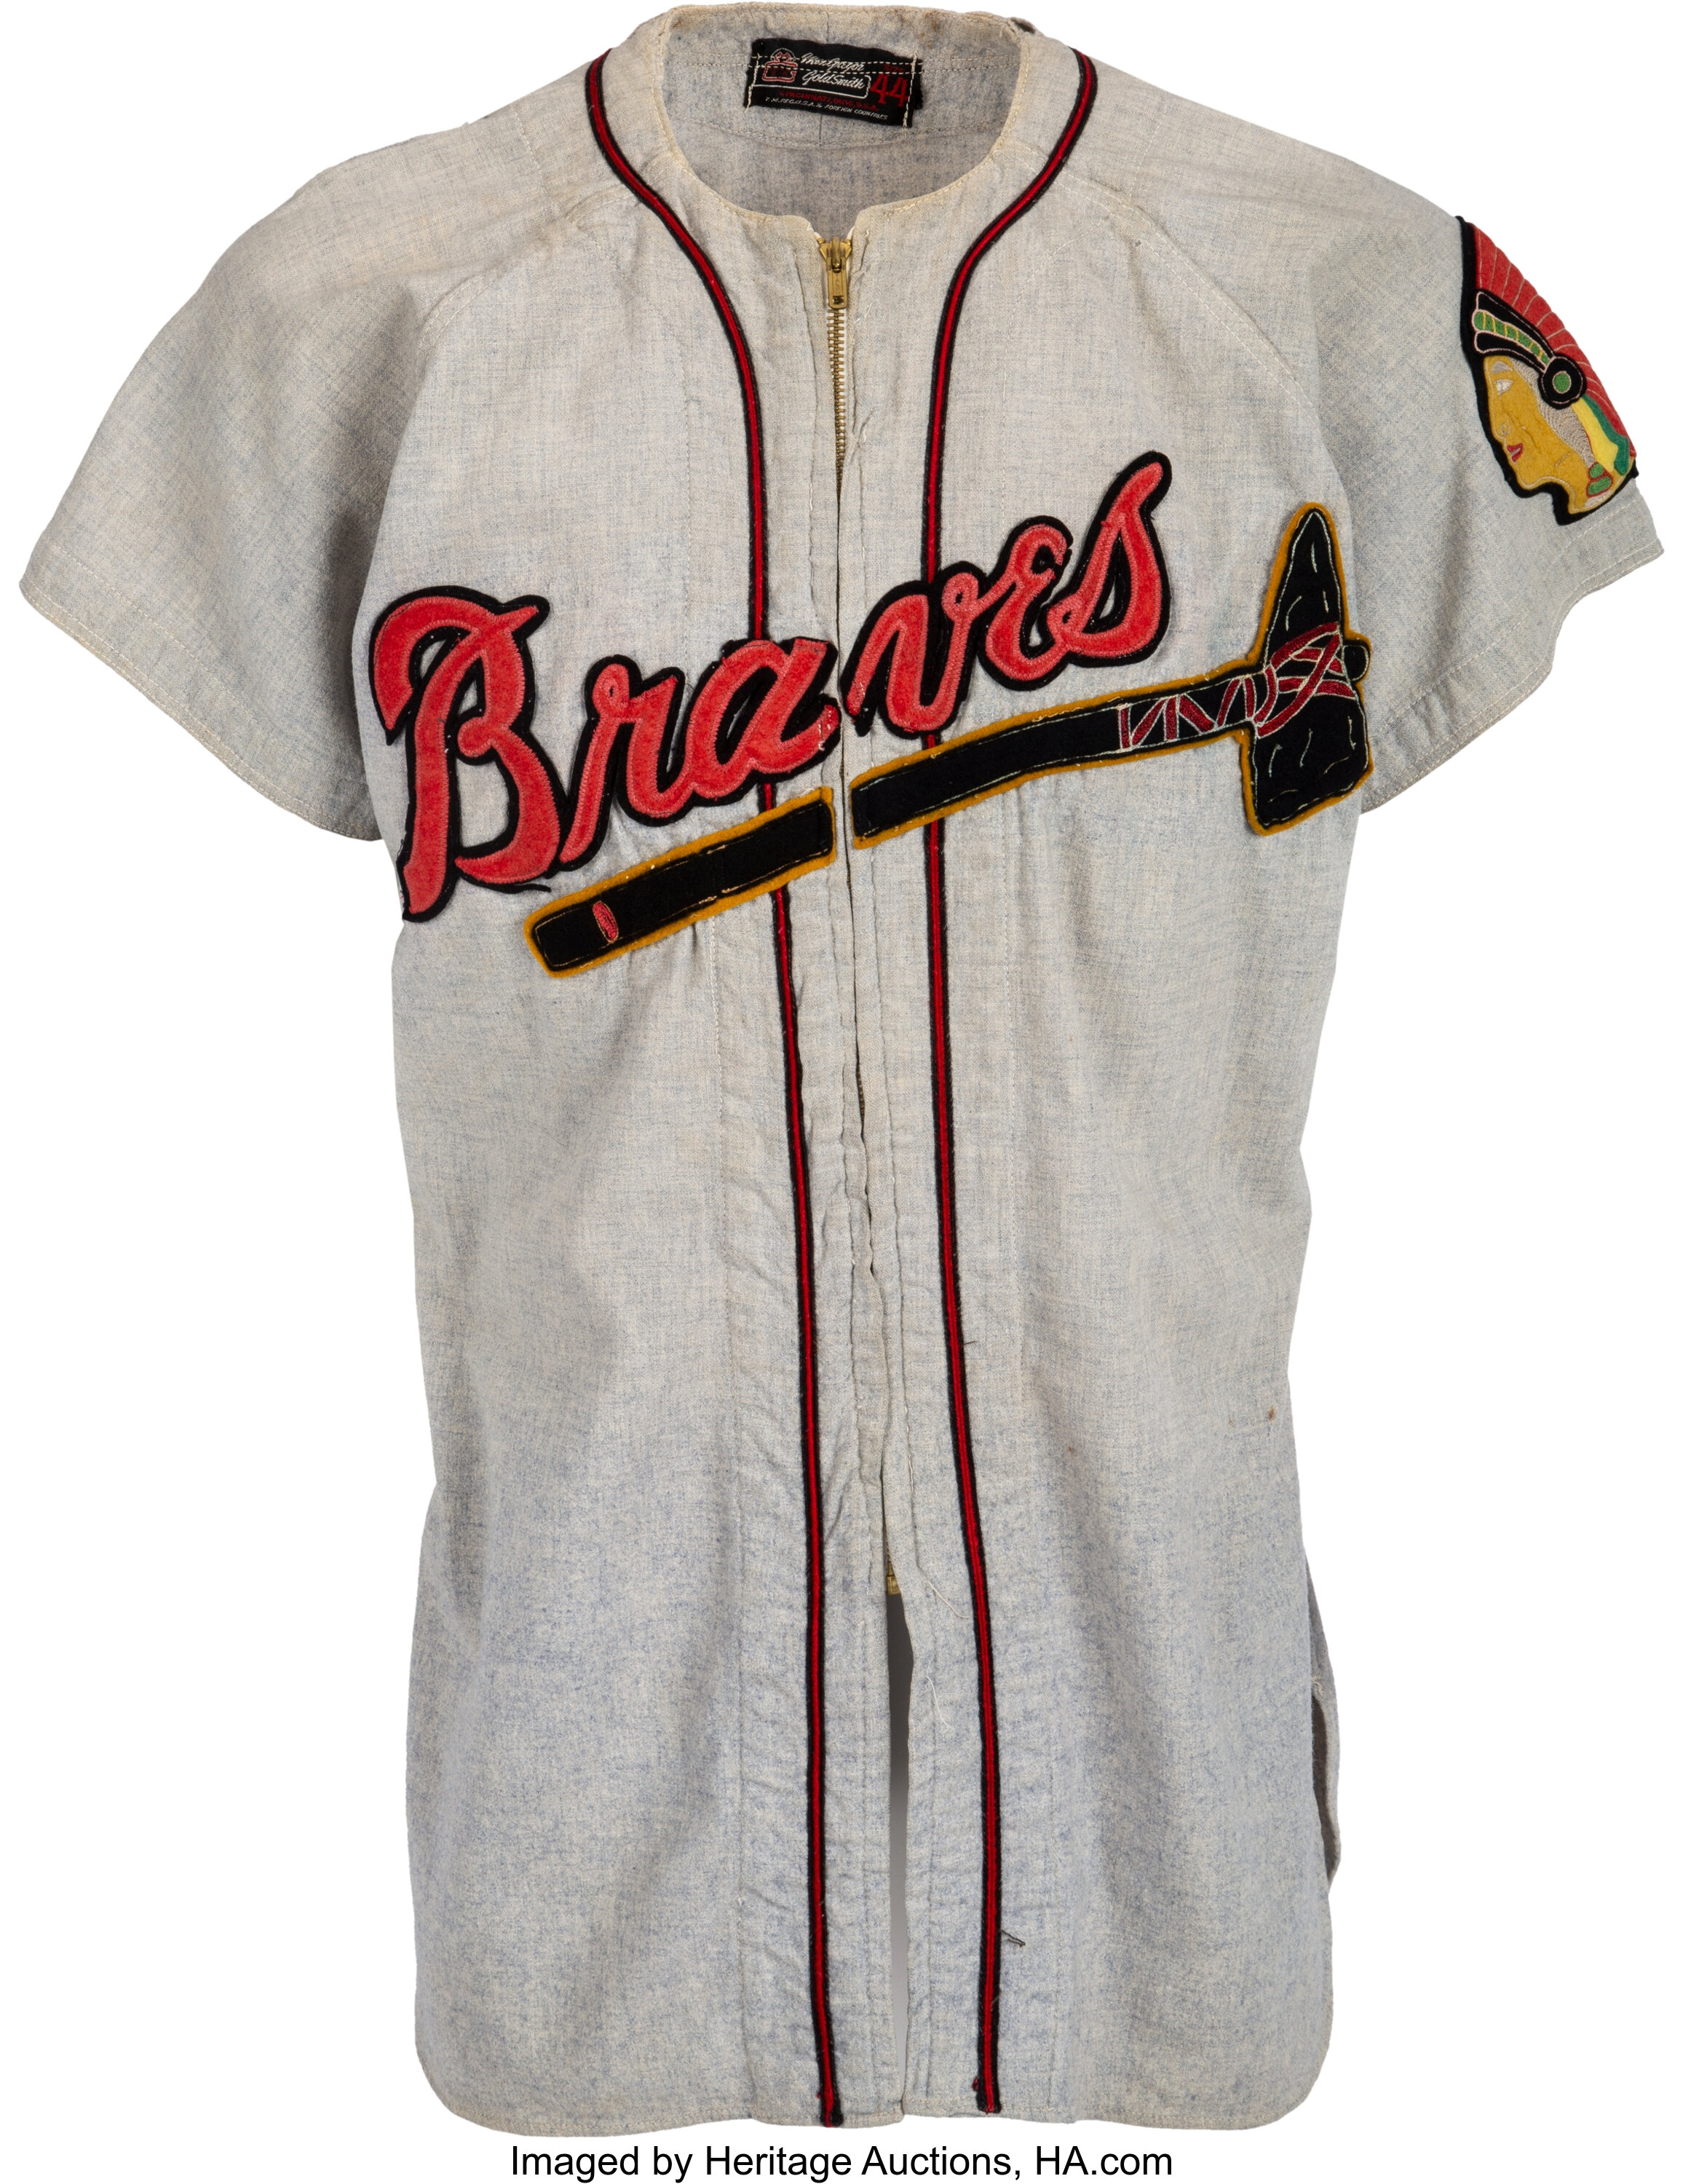 Official Boston Braves Gear, Braves Jerseys, Store, Braves Gifts, Apparel